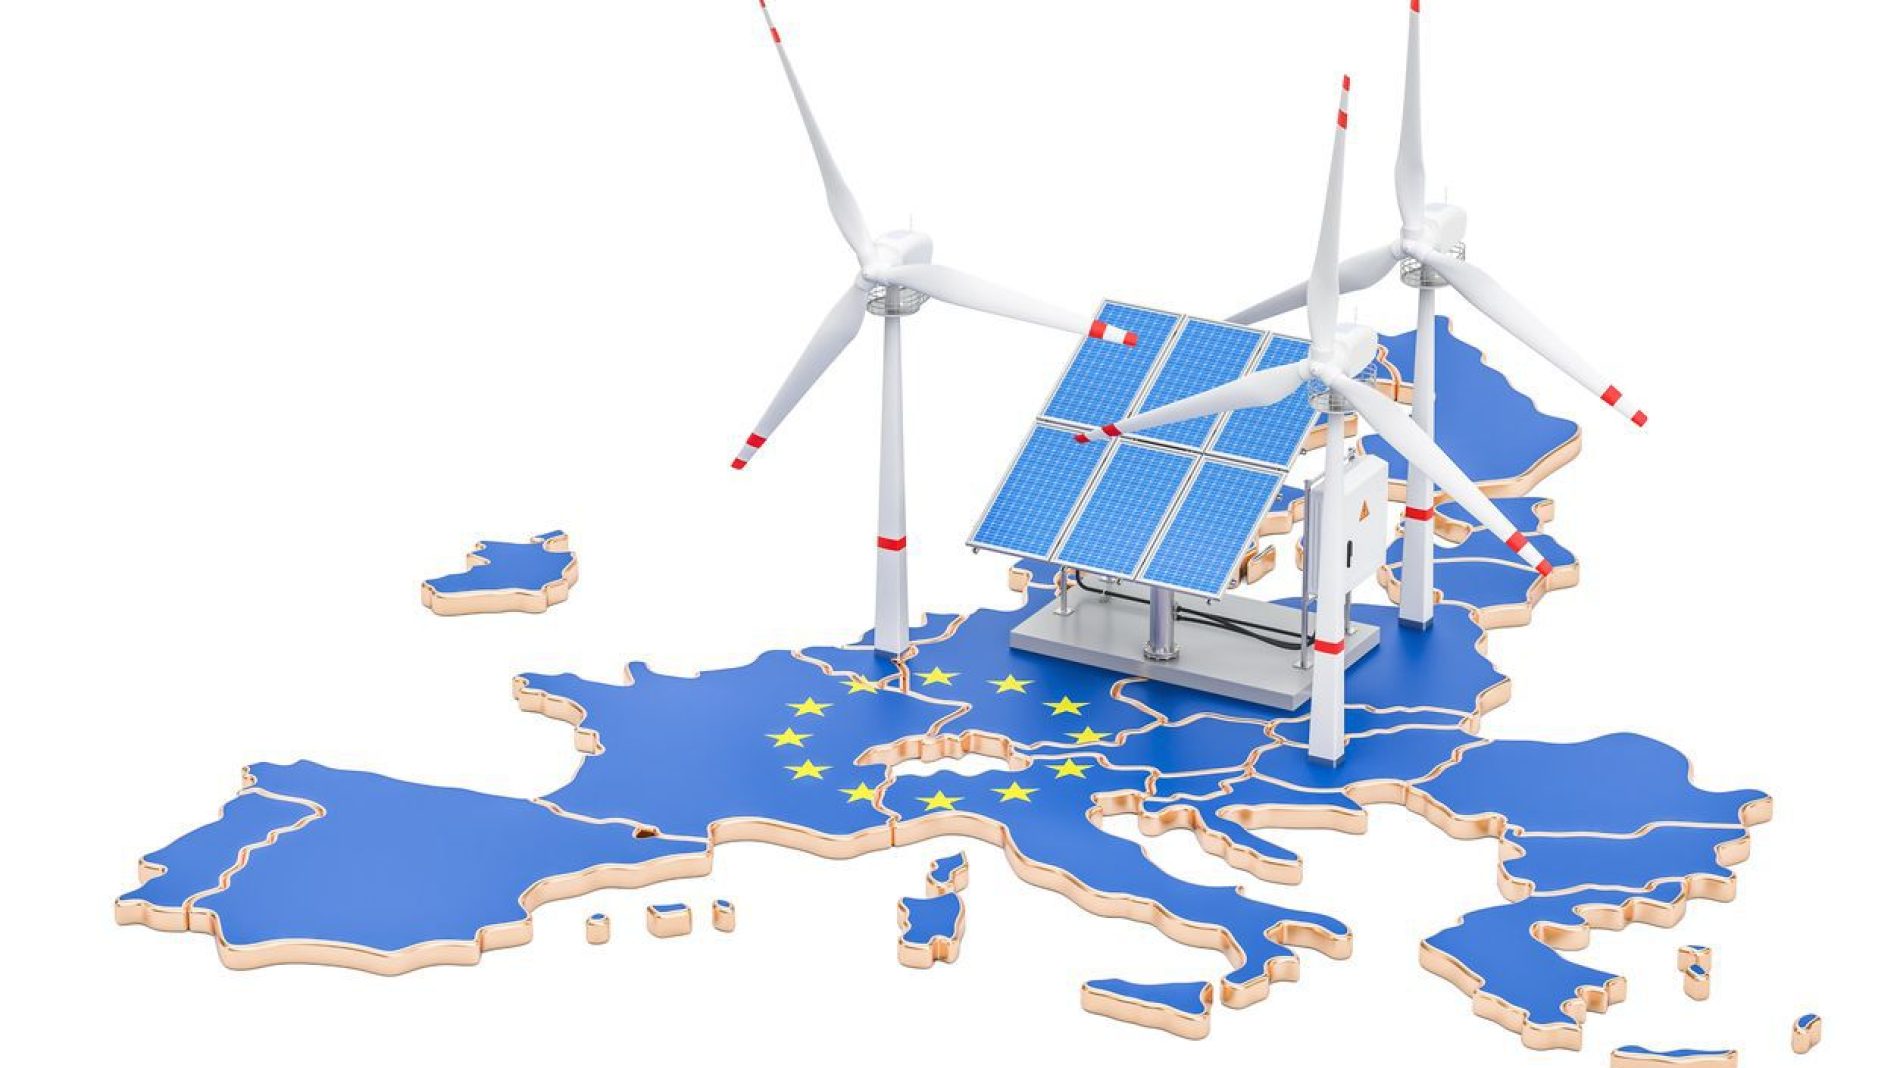 European map with renewable energy sources